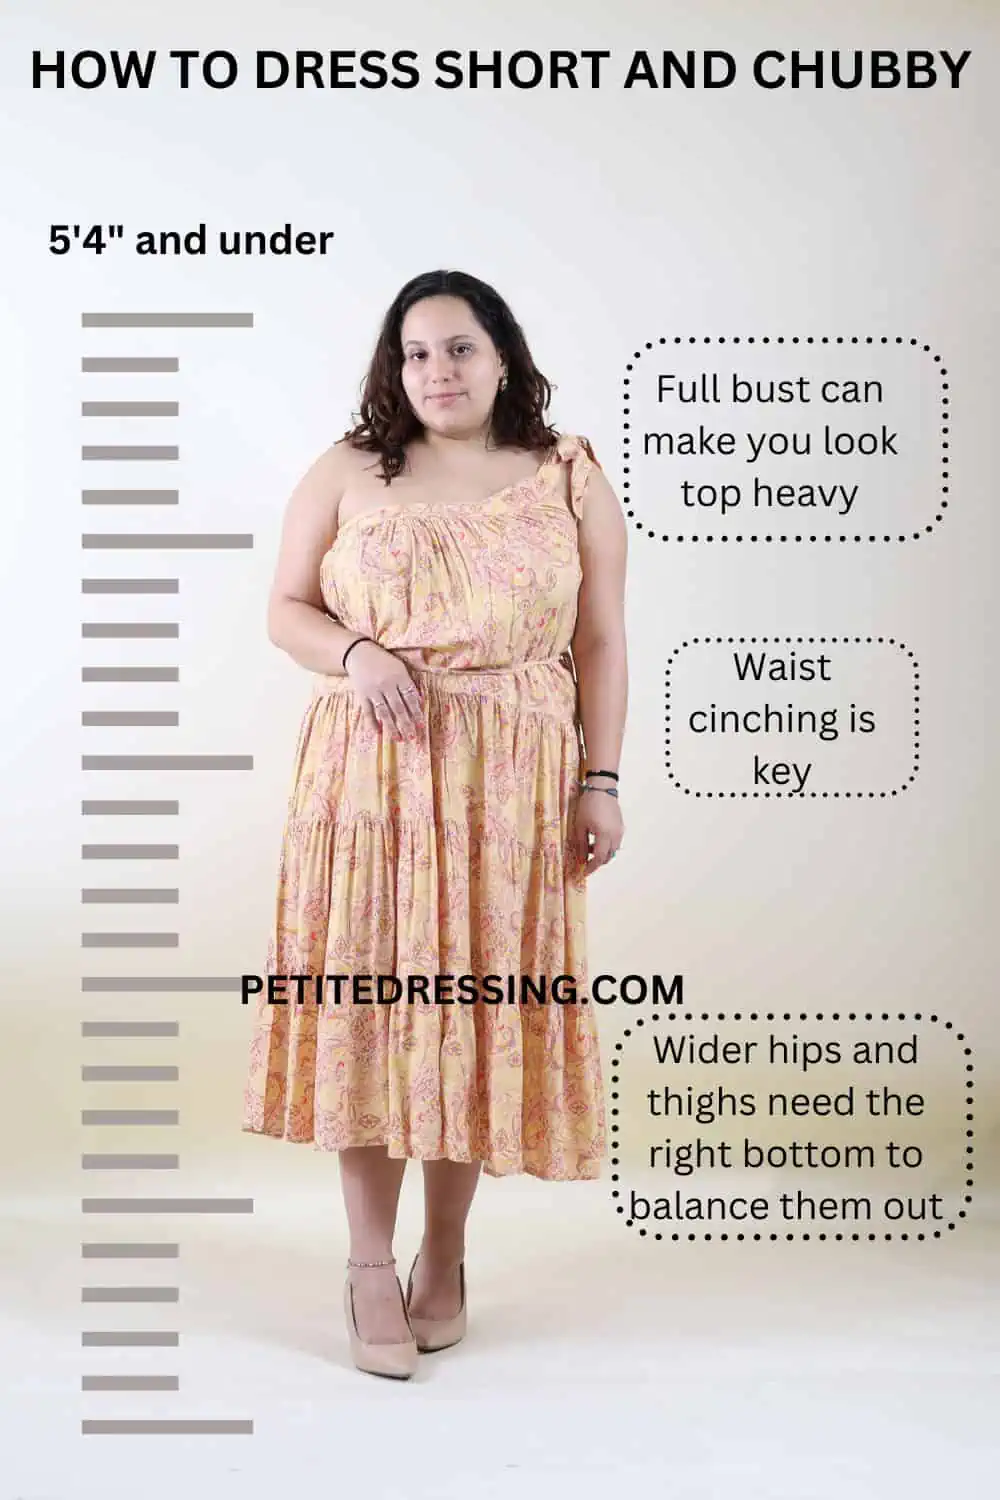 Exclamation point Traditional Ambient 10 Best Ways to Dress if you are Short and Chubby